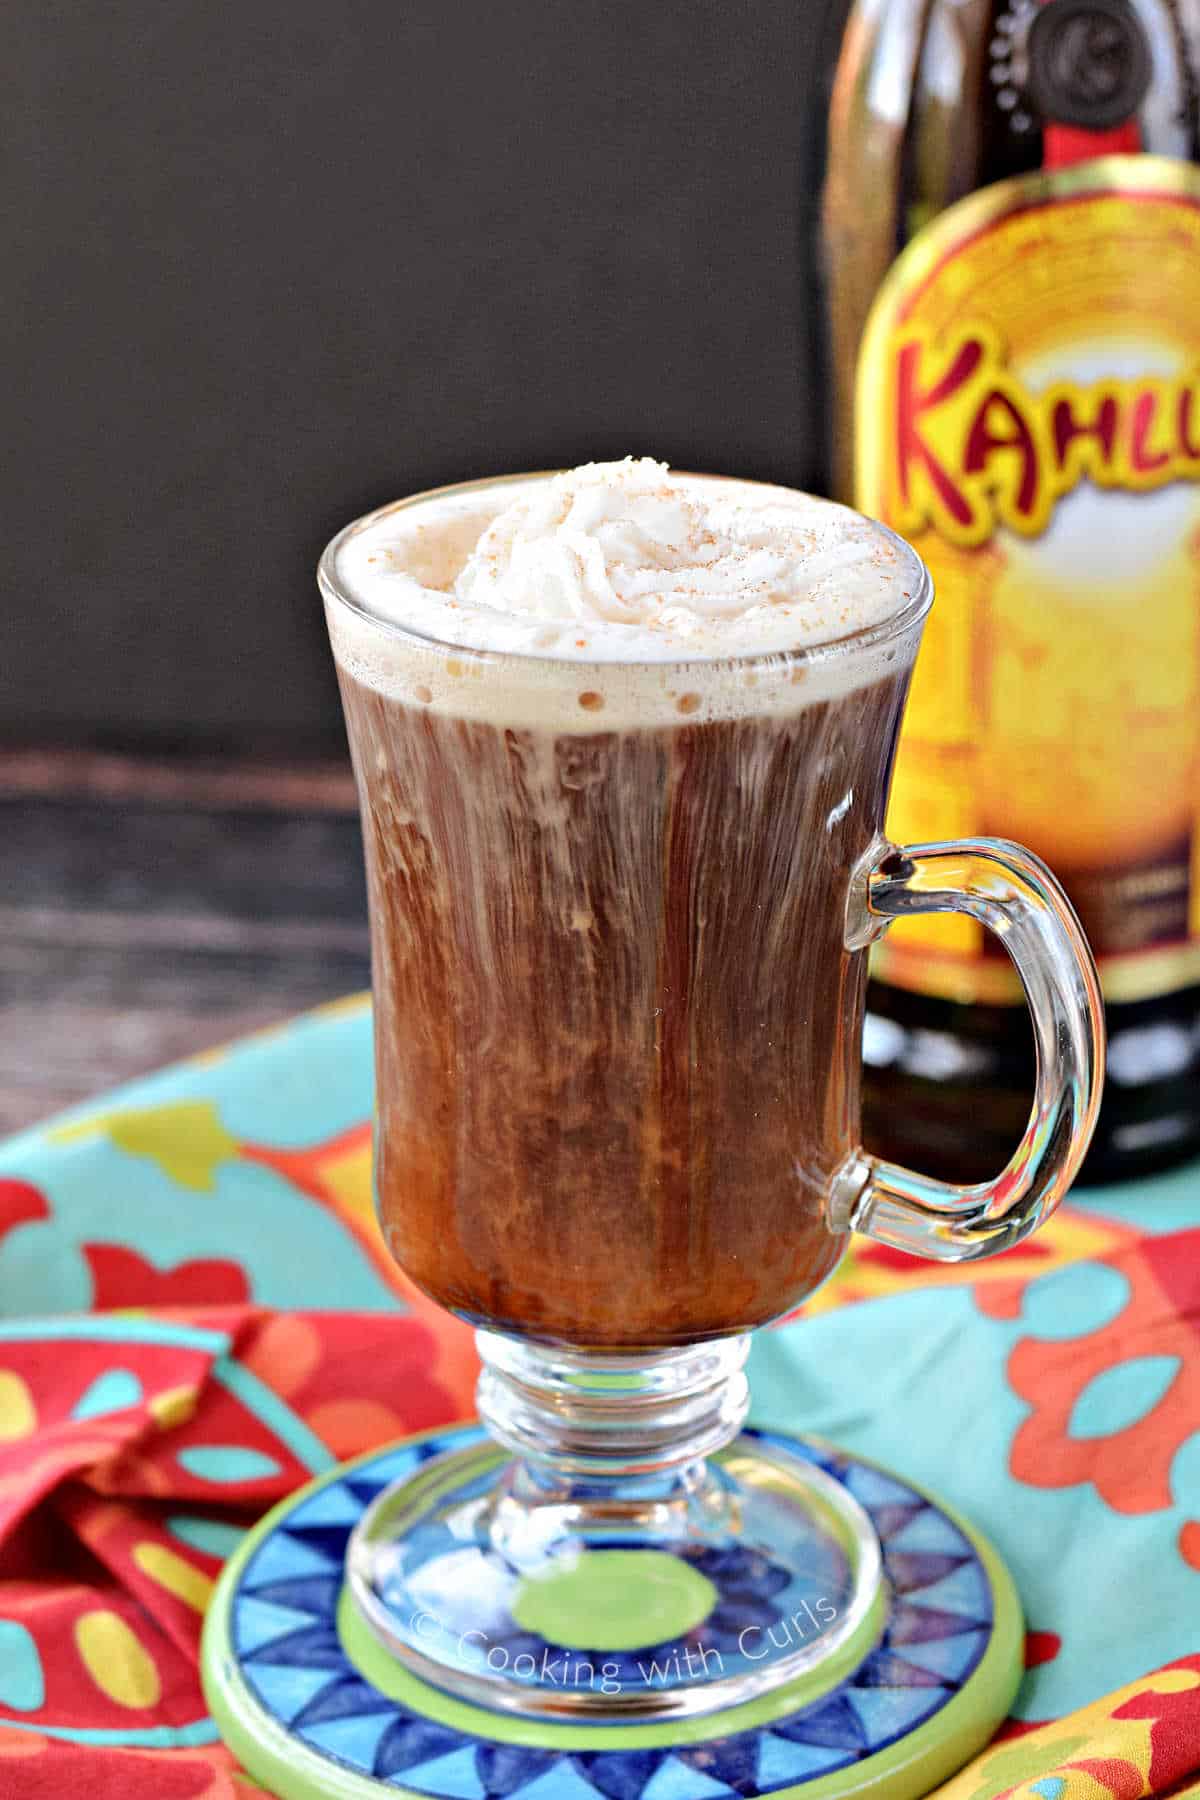 A coffee cocktail in a tall glass mug topped with whipped cream, with a bottle of Kahlua in the background.